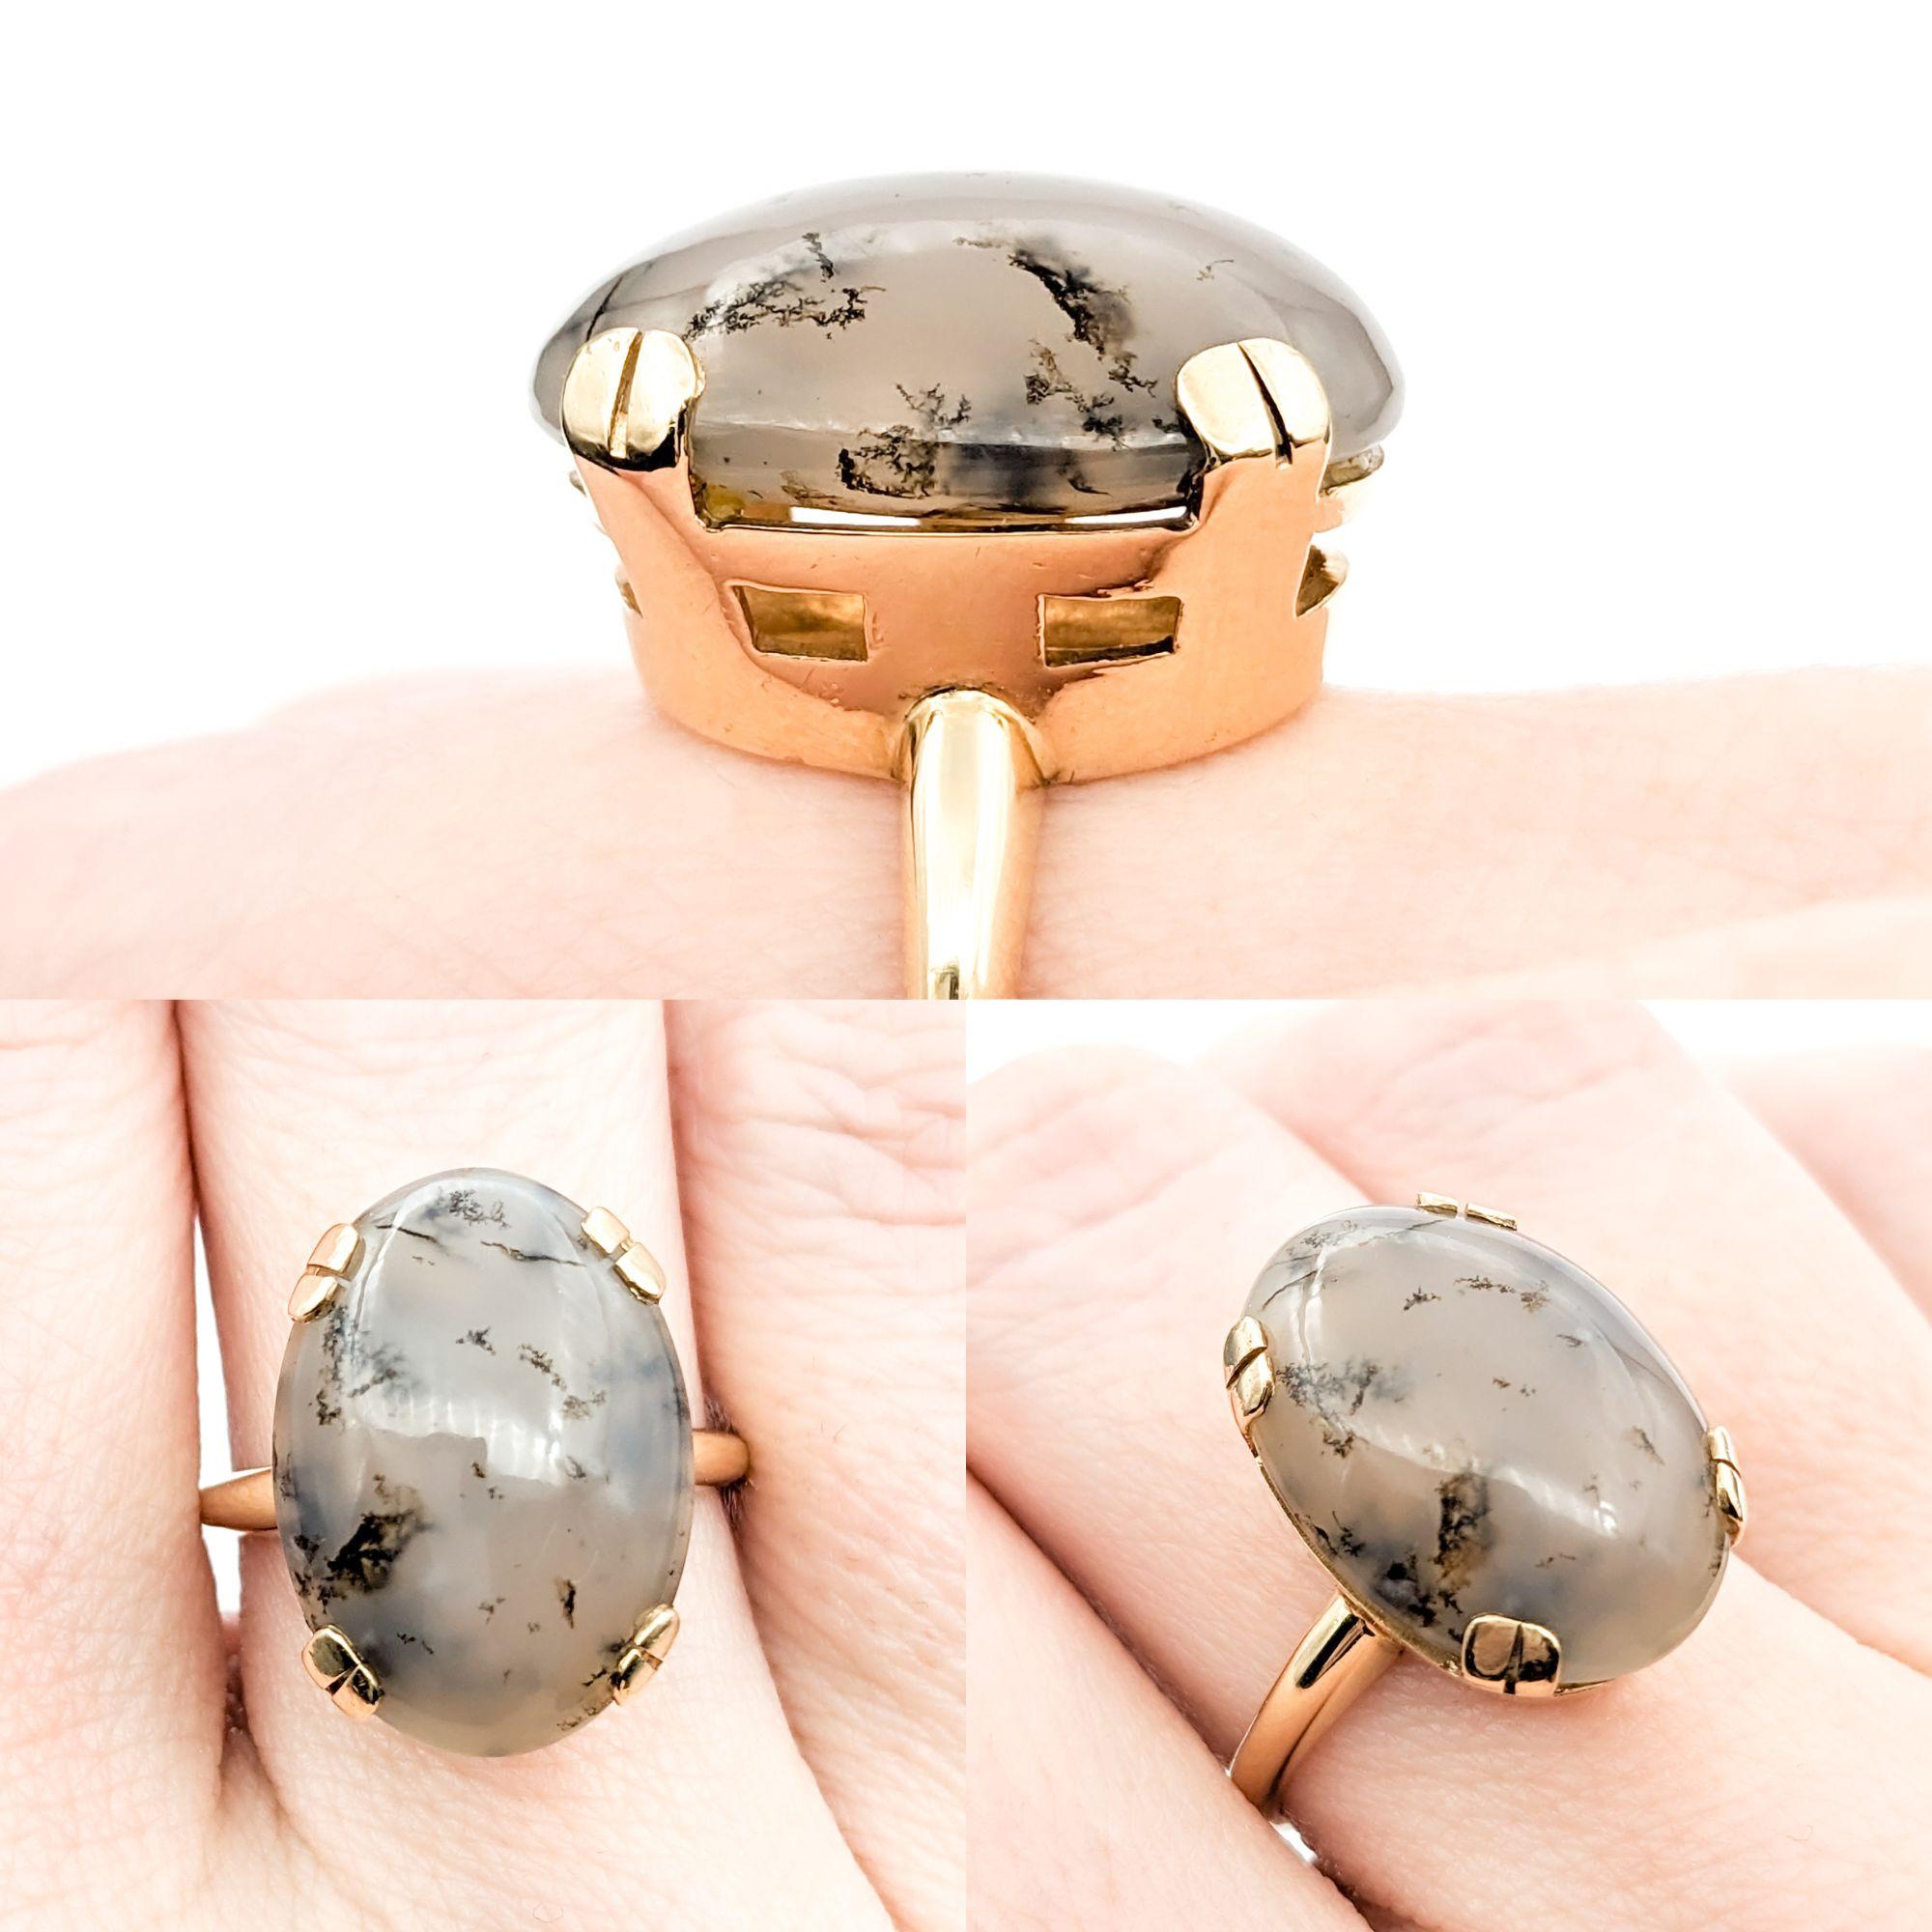 Dendritic Agate & 14K Gold Cocktail Ring 


This distinctive ring, beautifully crafted in 14kt yellow gold, showcases an 8.50ct cabochon dendritic agate, celebrated for its natural, tree-like inclusions that create a captivating landscape within the